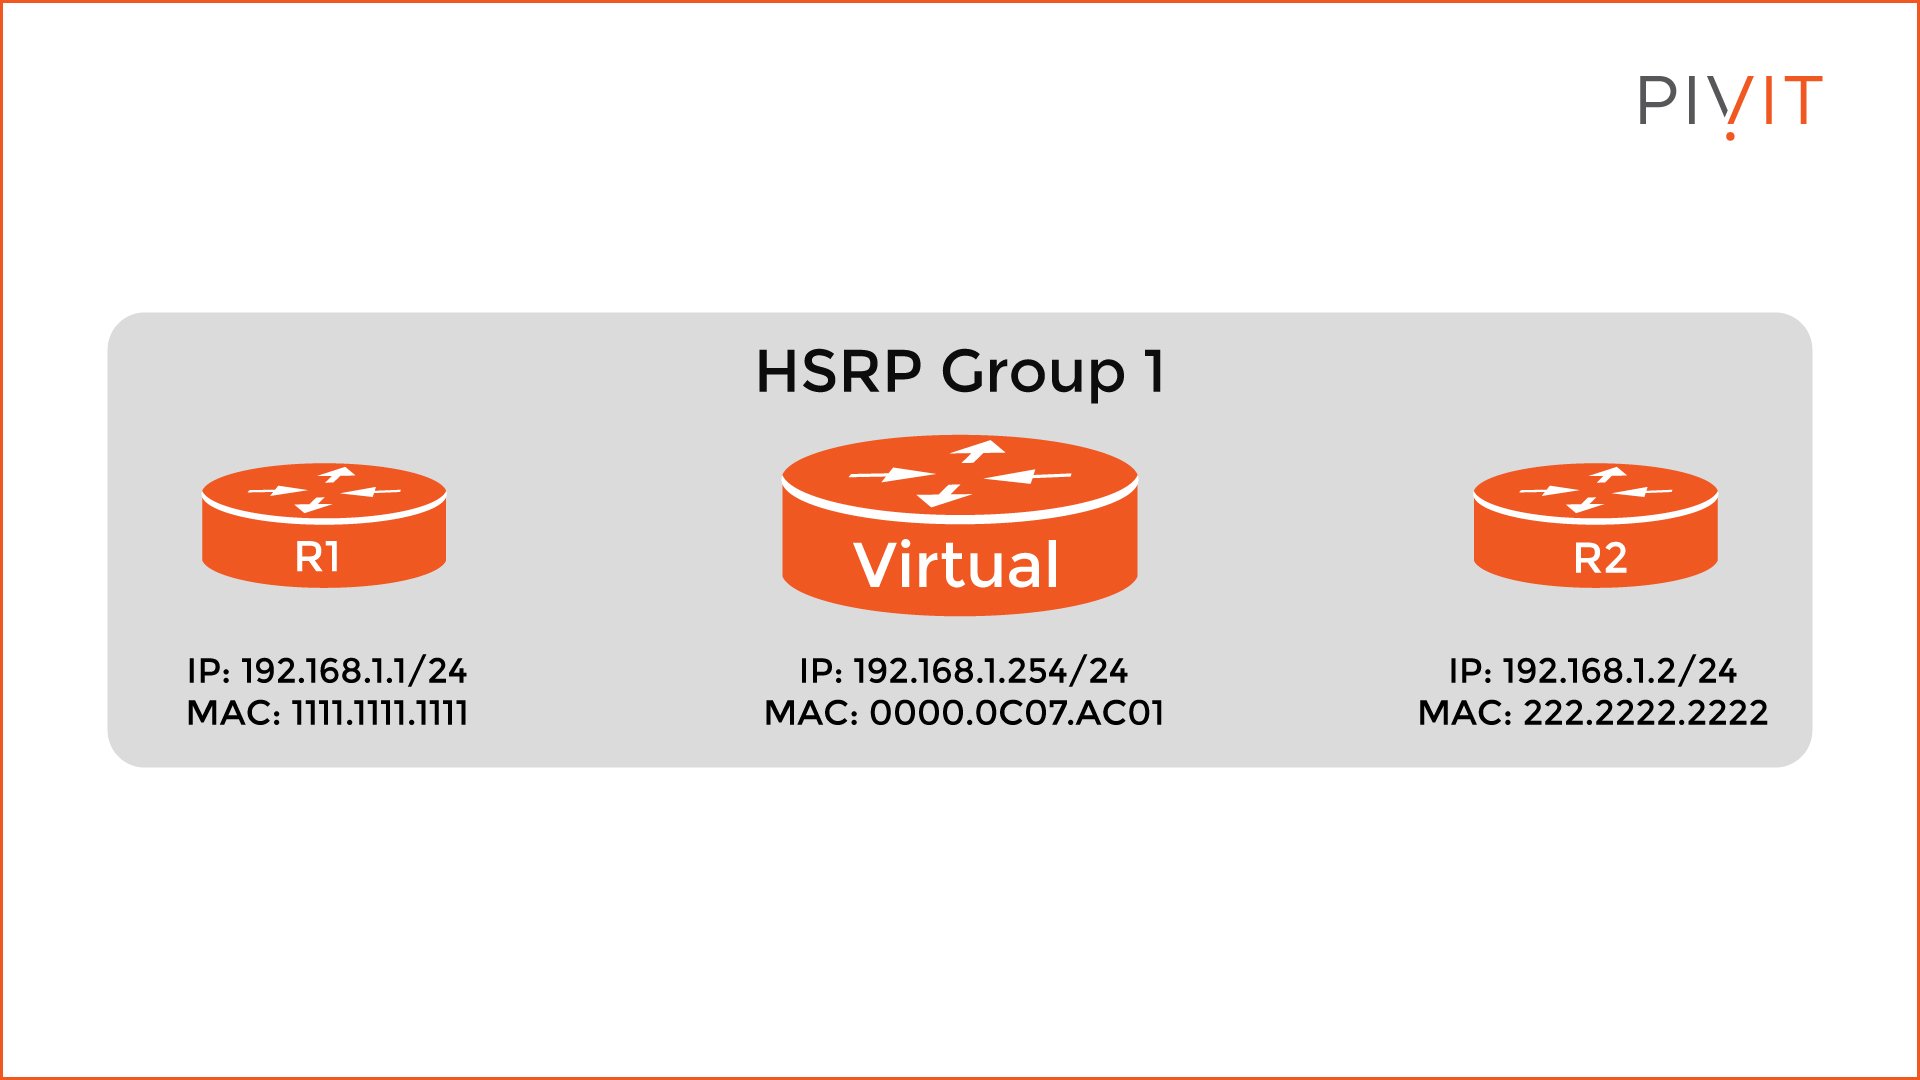 Two routers in an HSRP group with a virtual router